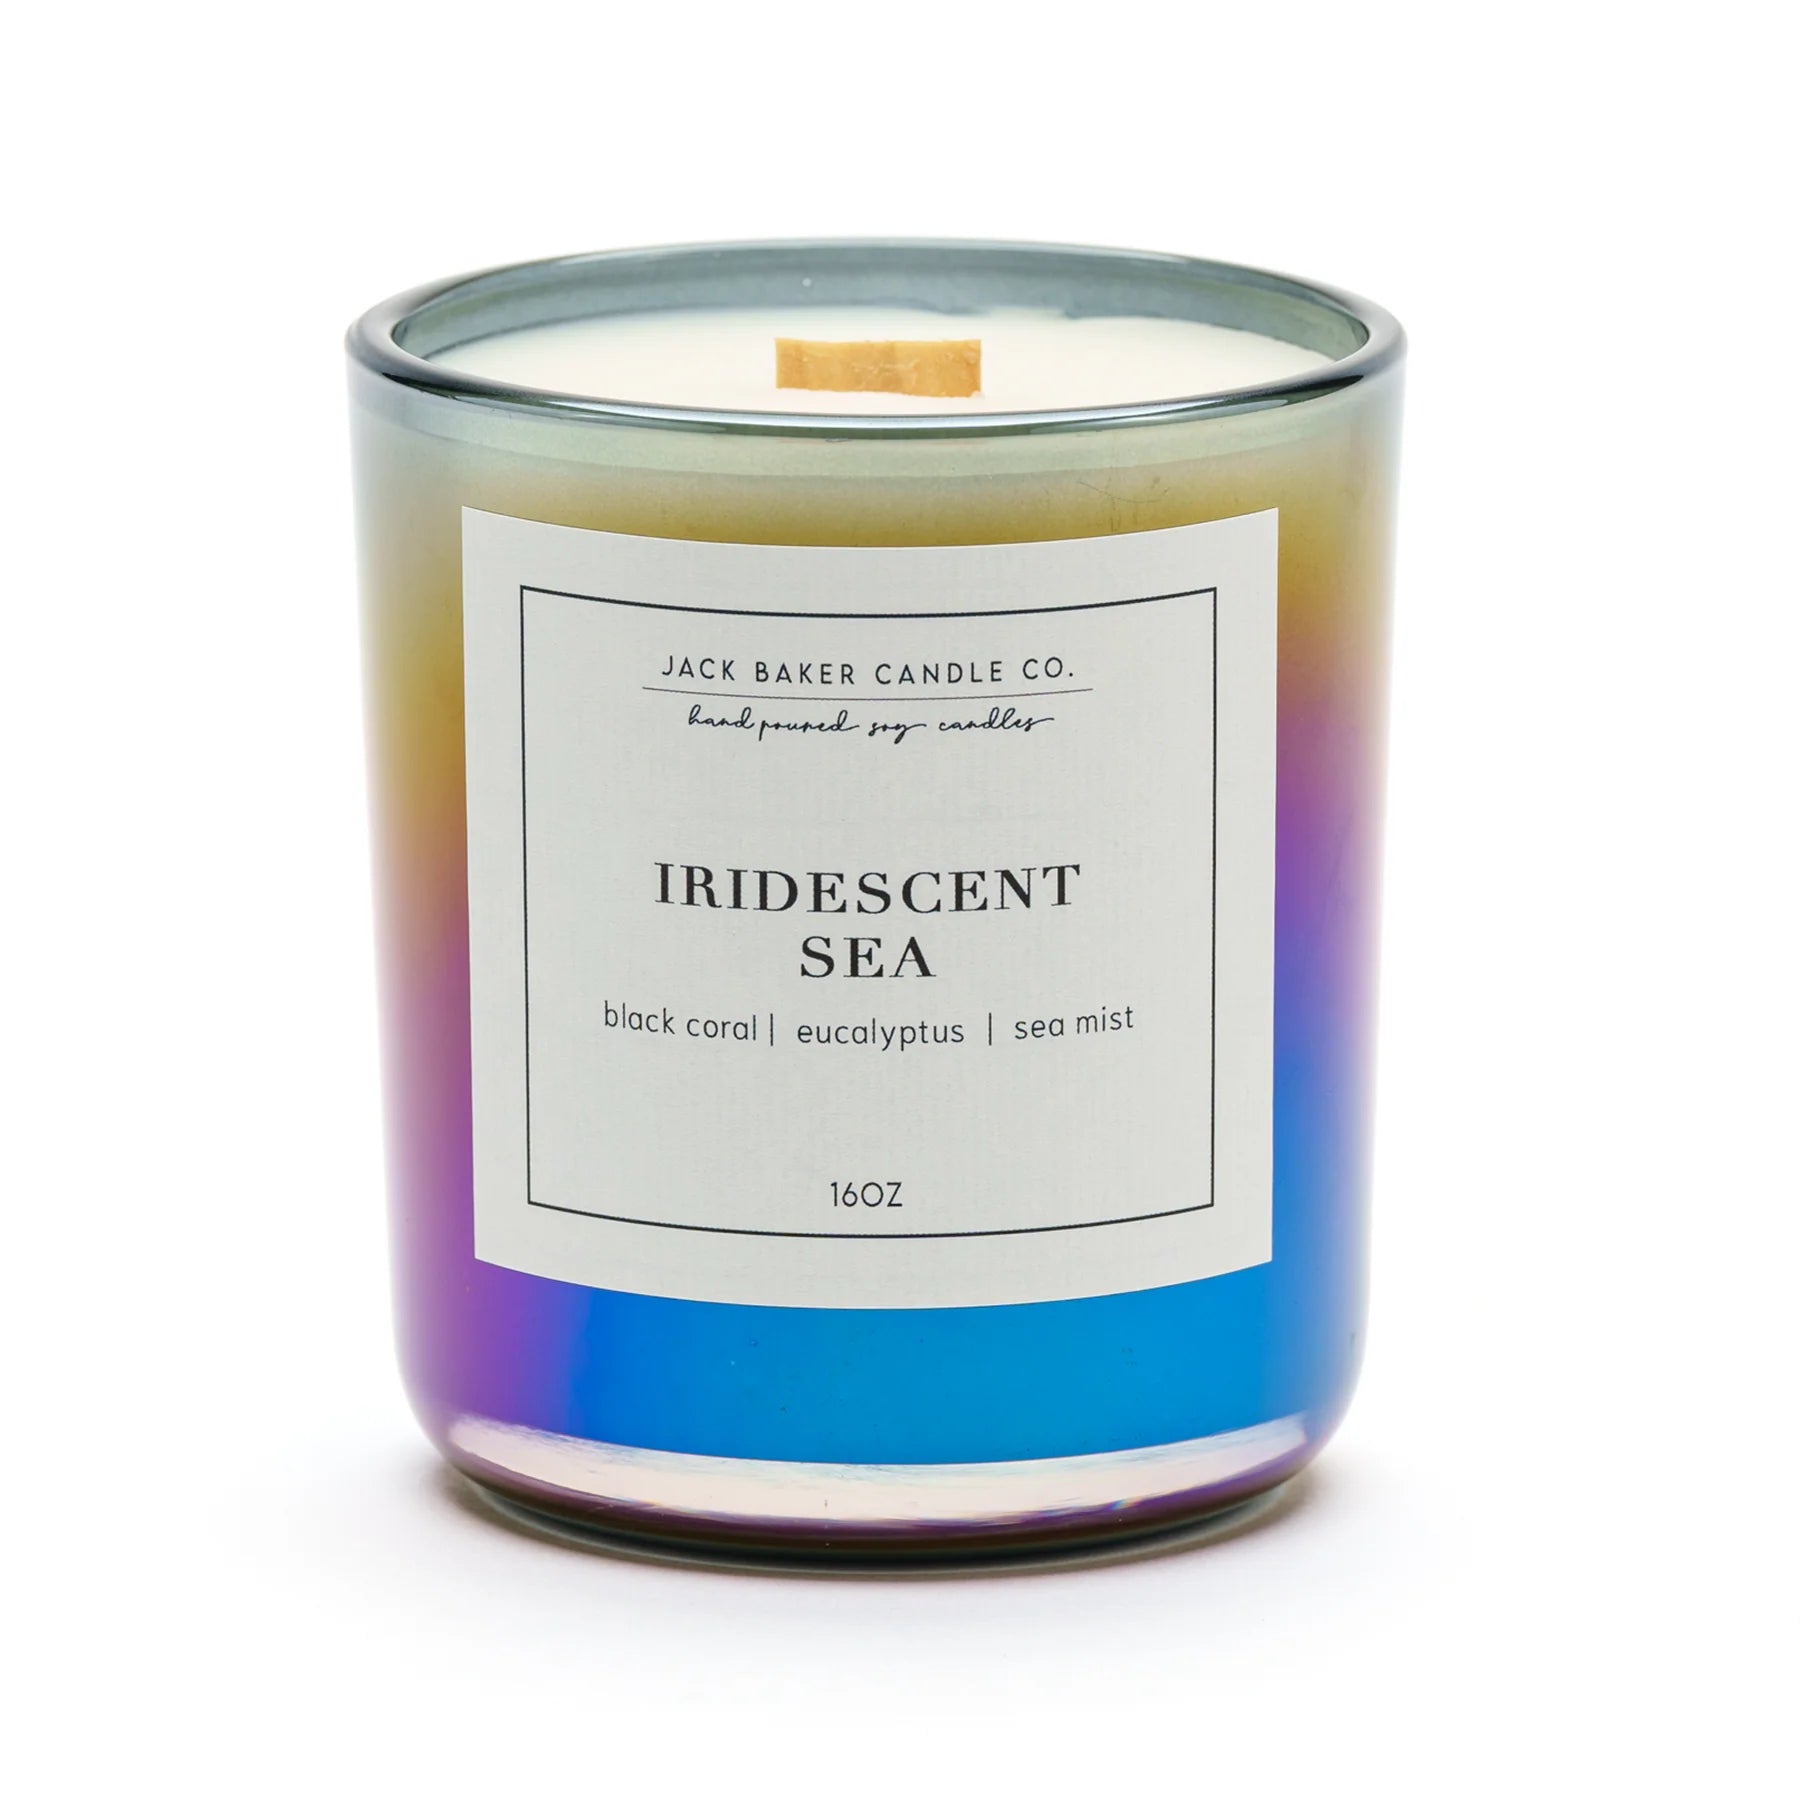 Iridescent Sea Opulence Collection Candle